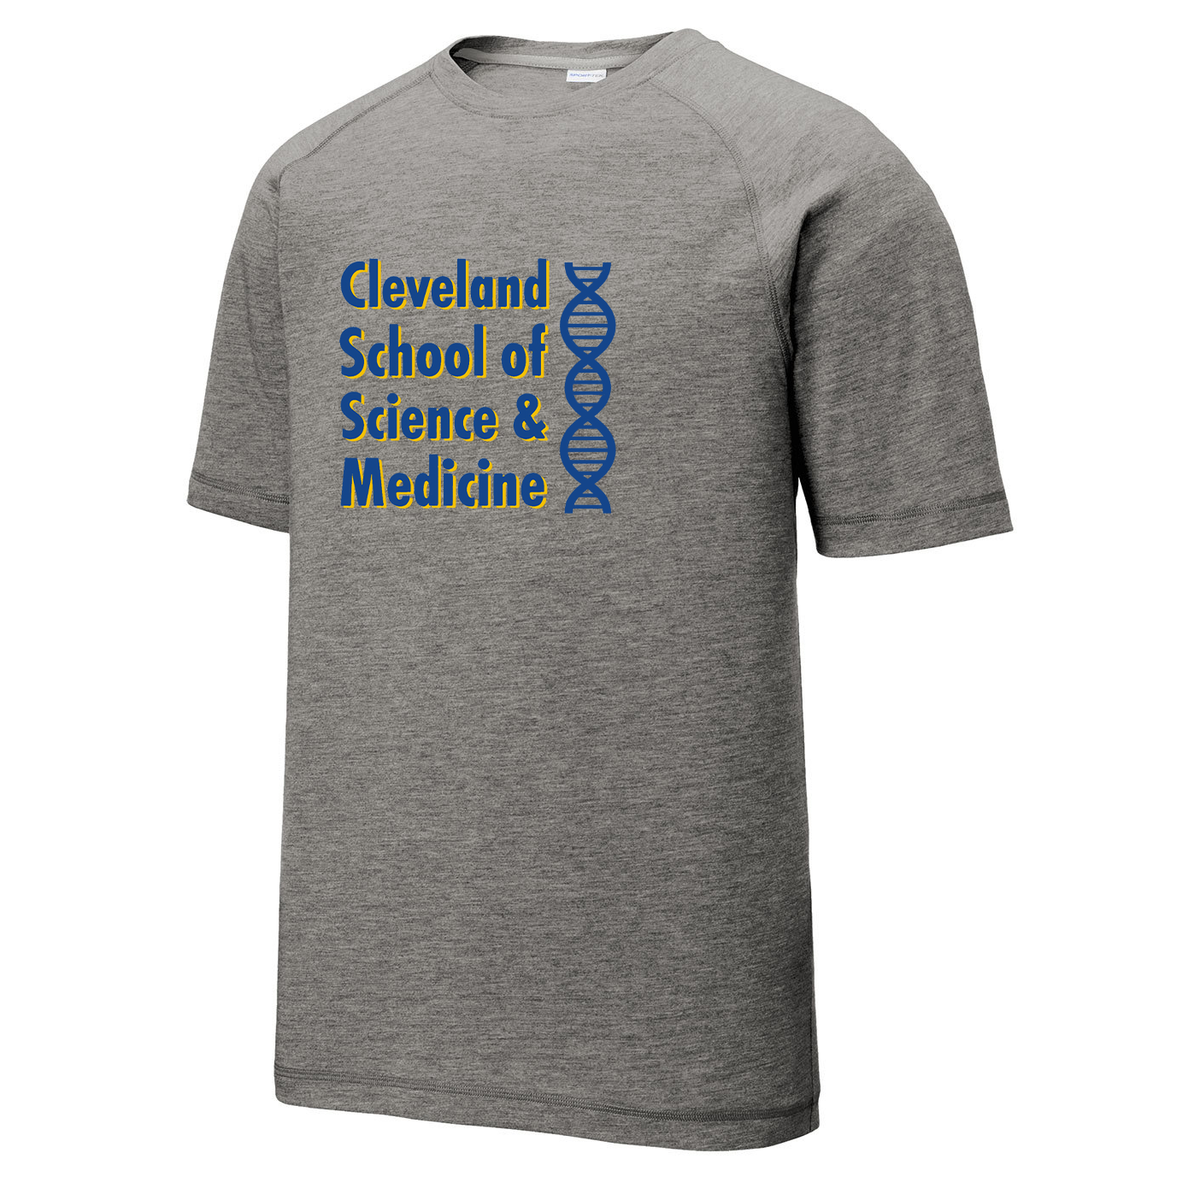 Cleveland School of Science and Medicine Raglan CottonTouch Tee